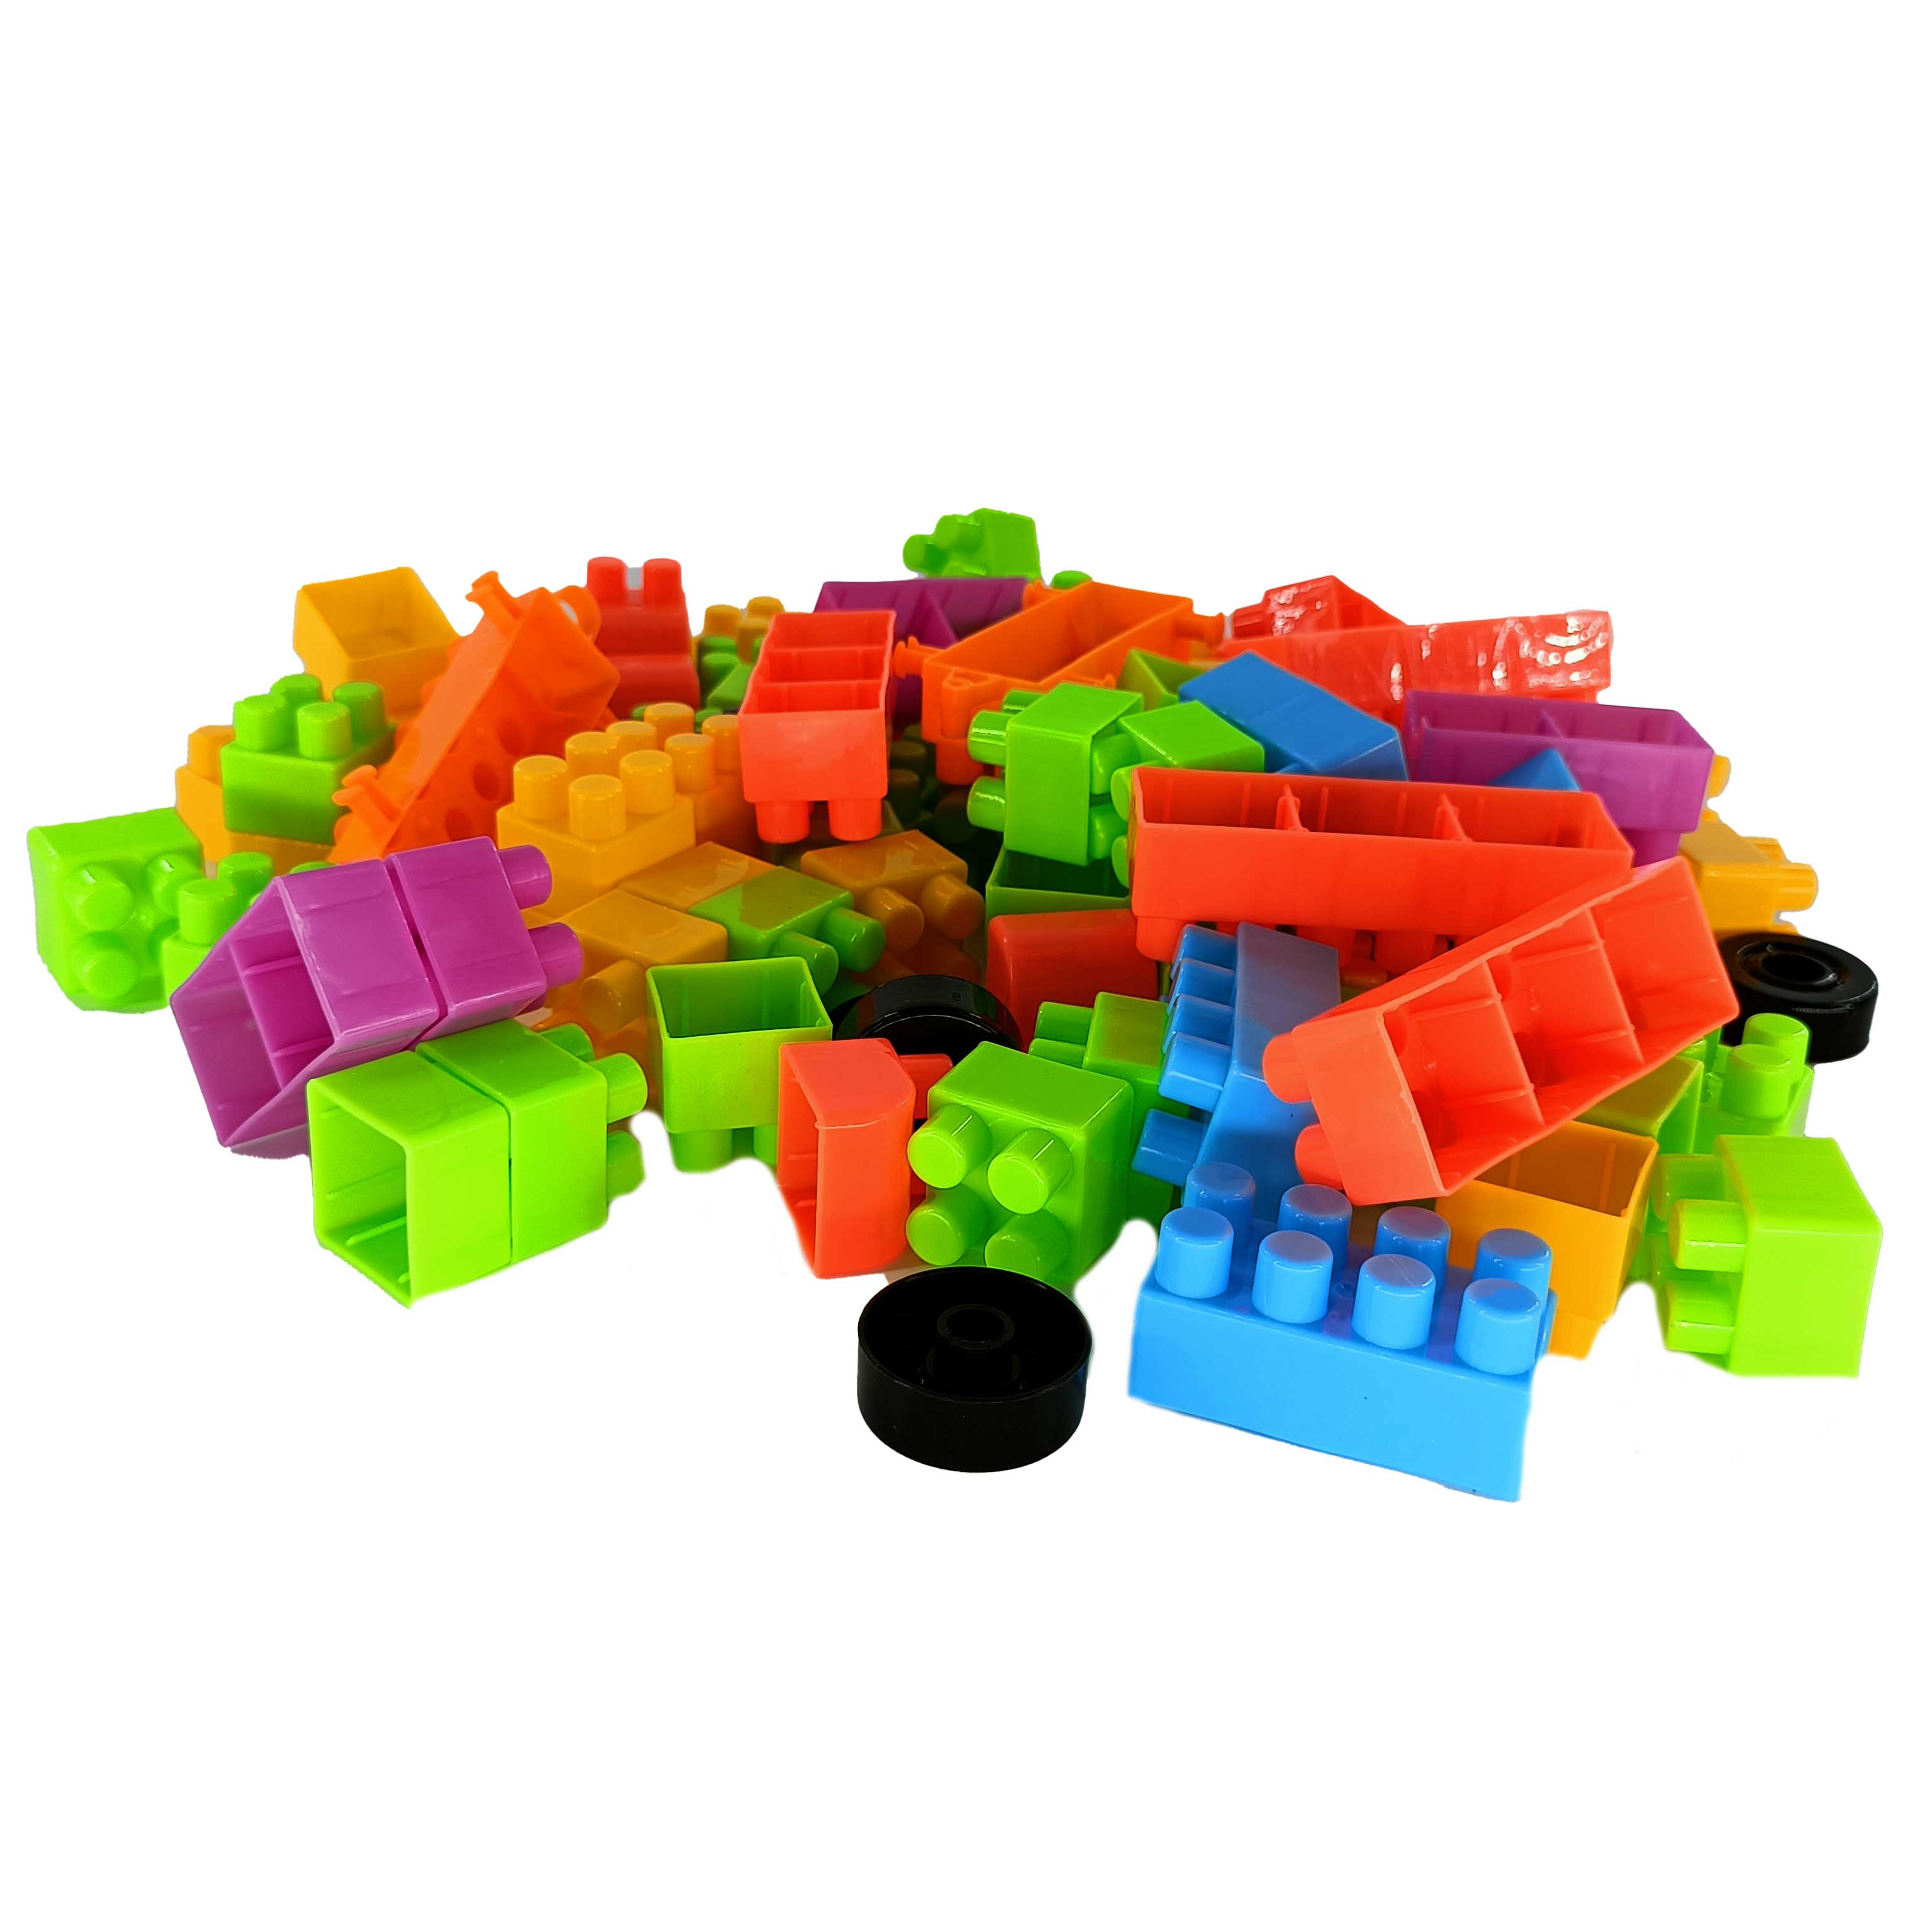 Building Block with Wheels Creative Smart Activity Fun and Learning Train Bricks Blocks for Kids